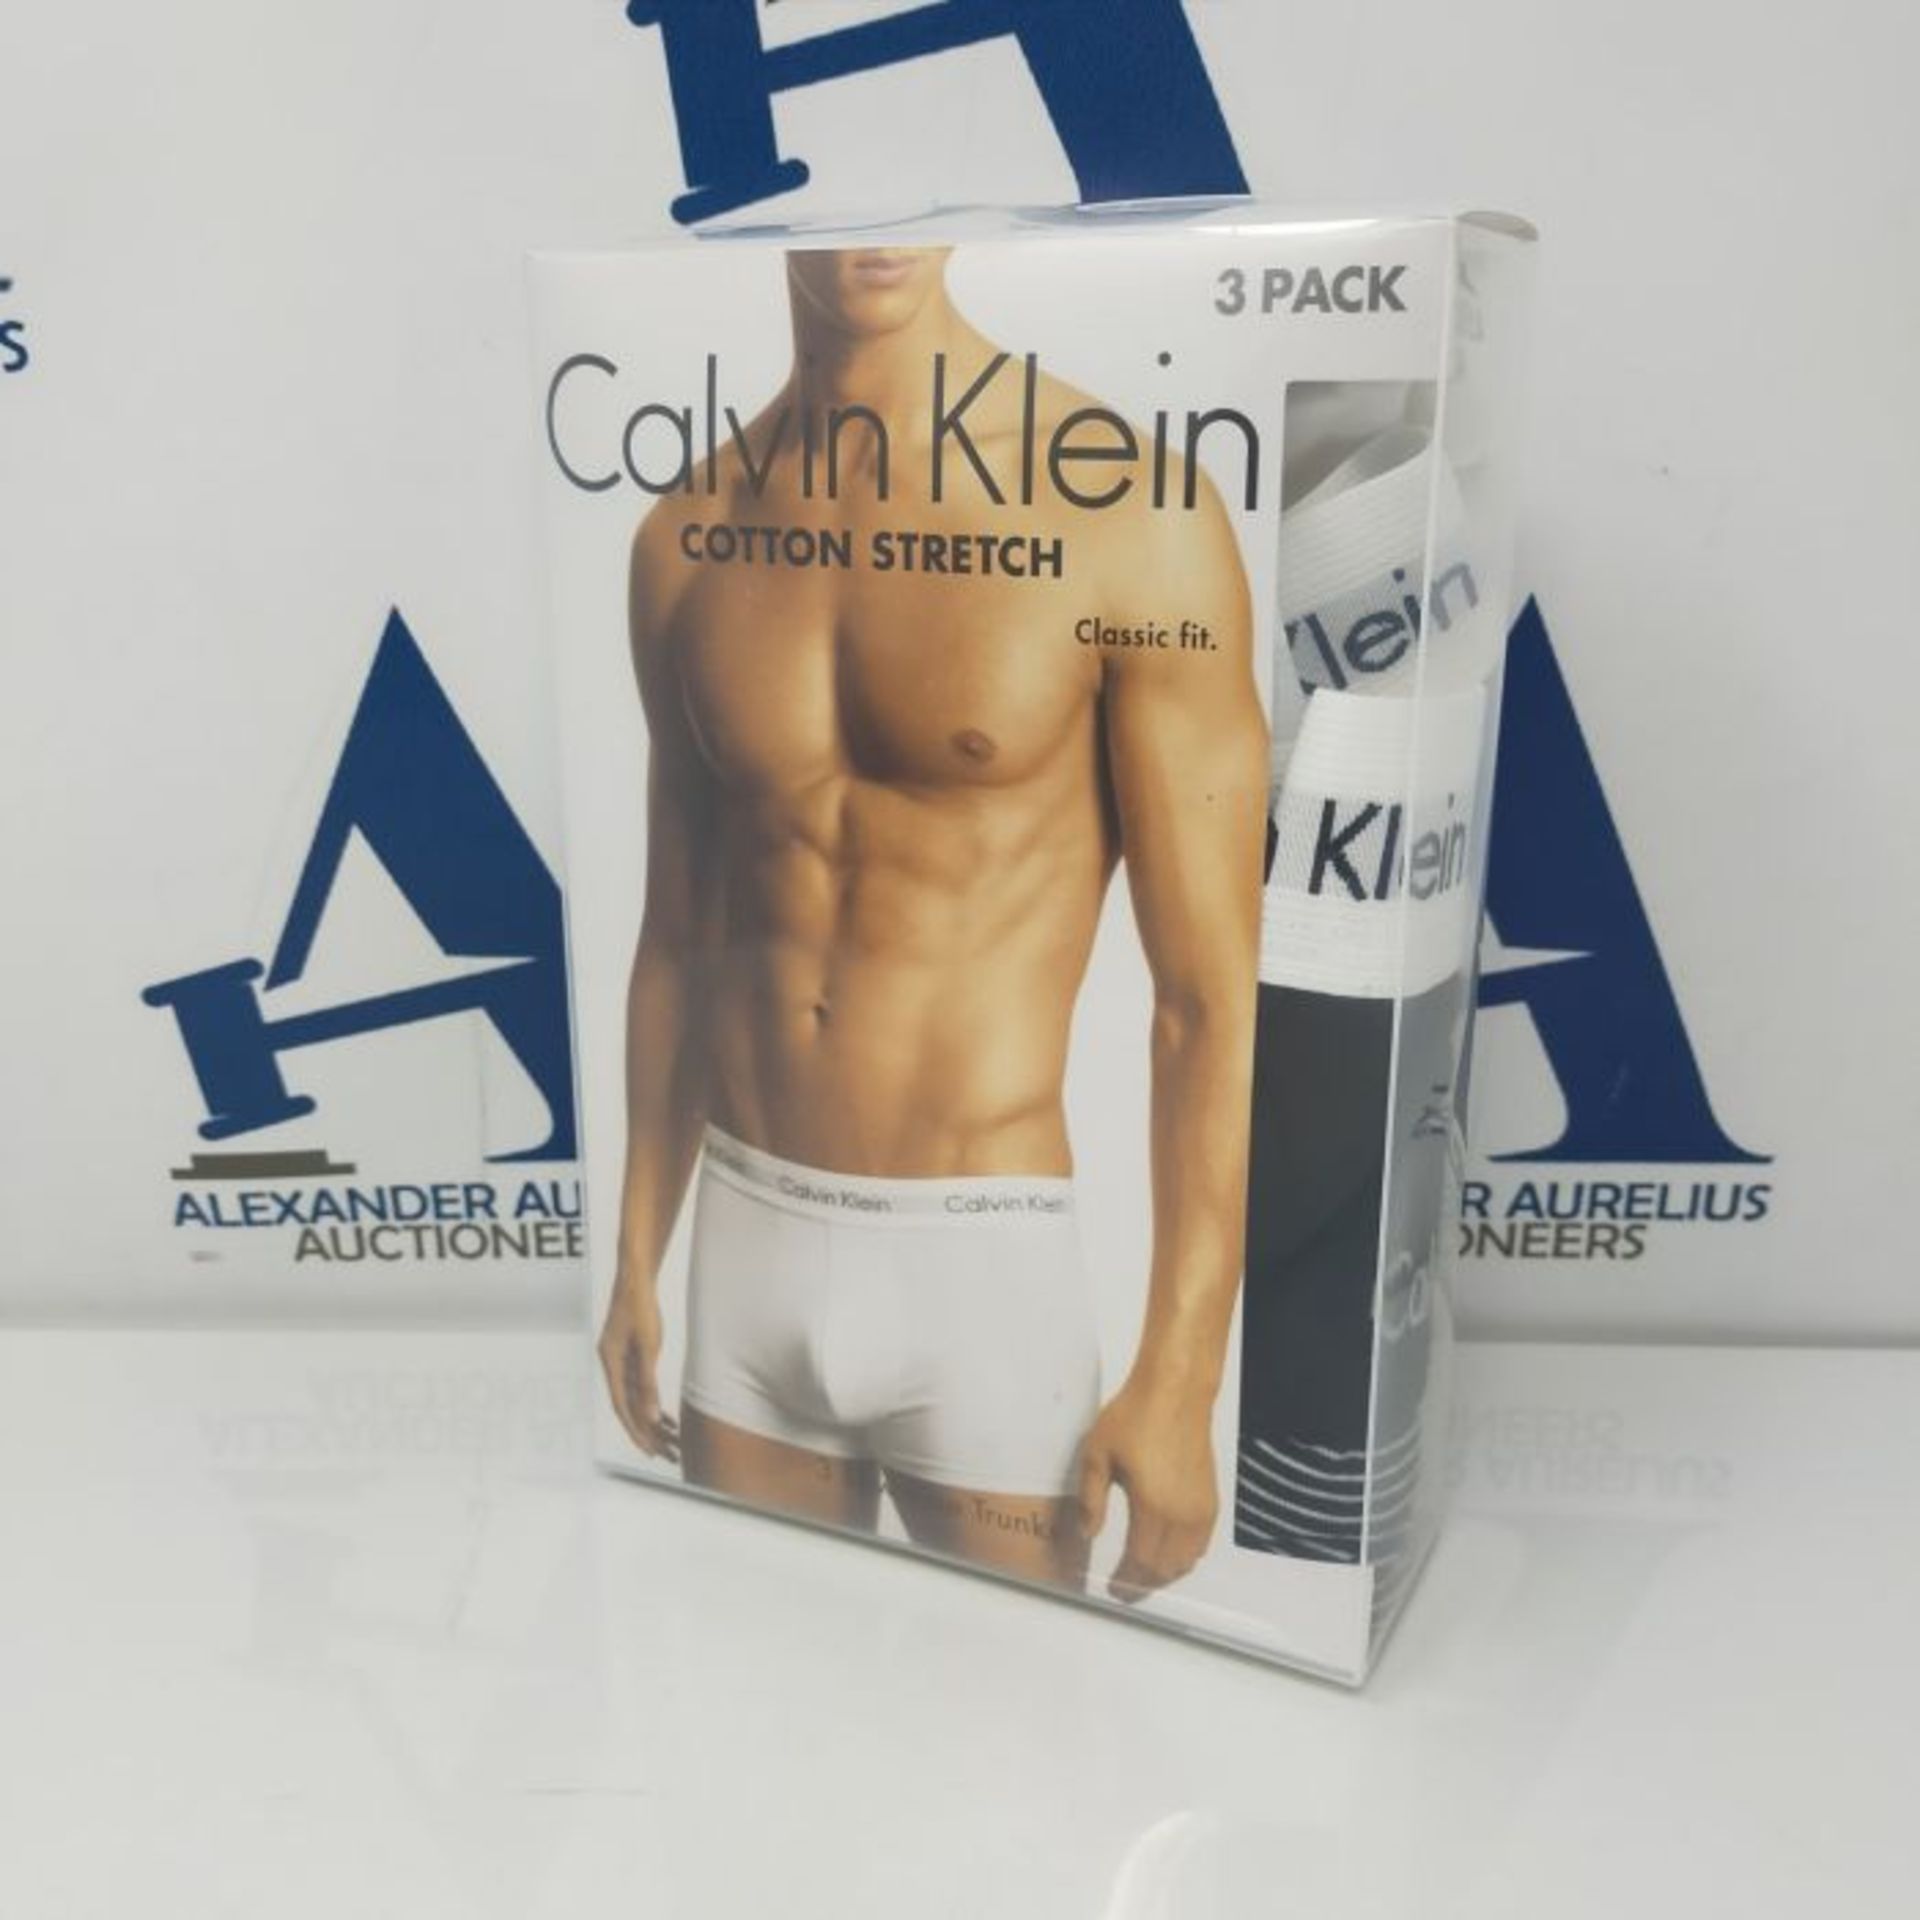 Calvin Klein Men's 3 Pack Low Rise Trunks - Cotton Stretch - Image 2 of 2